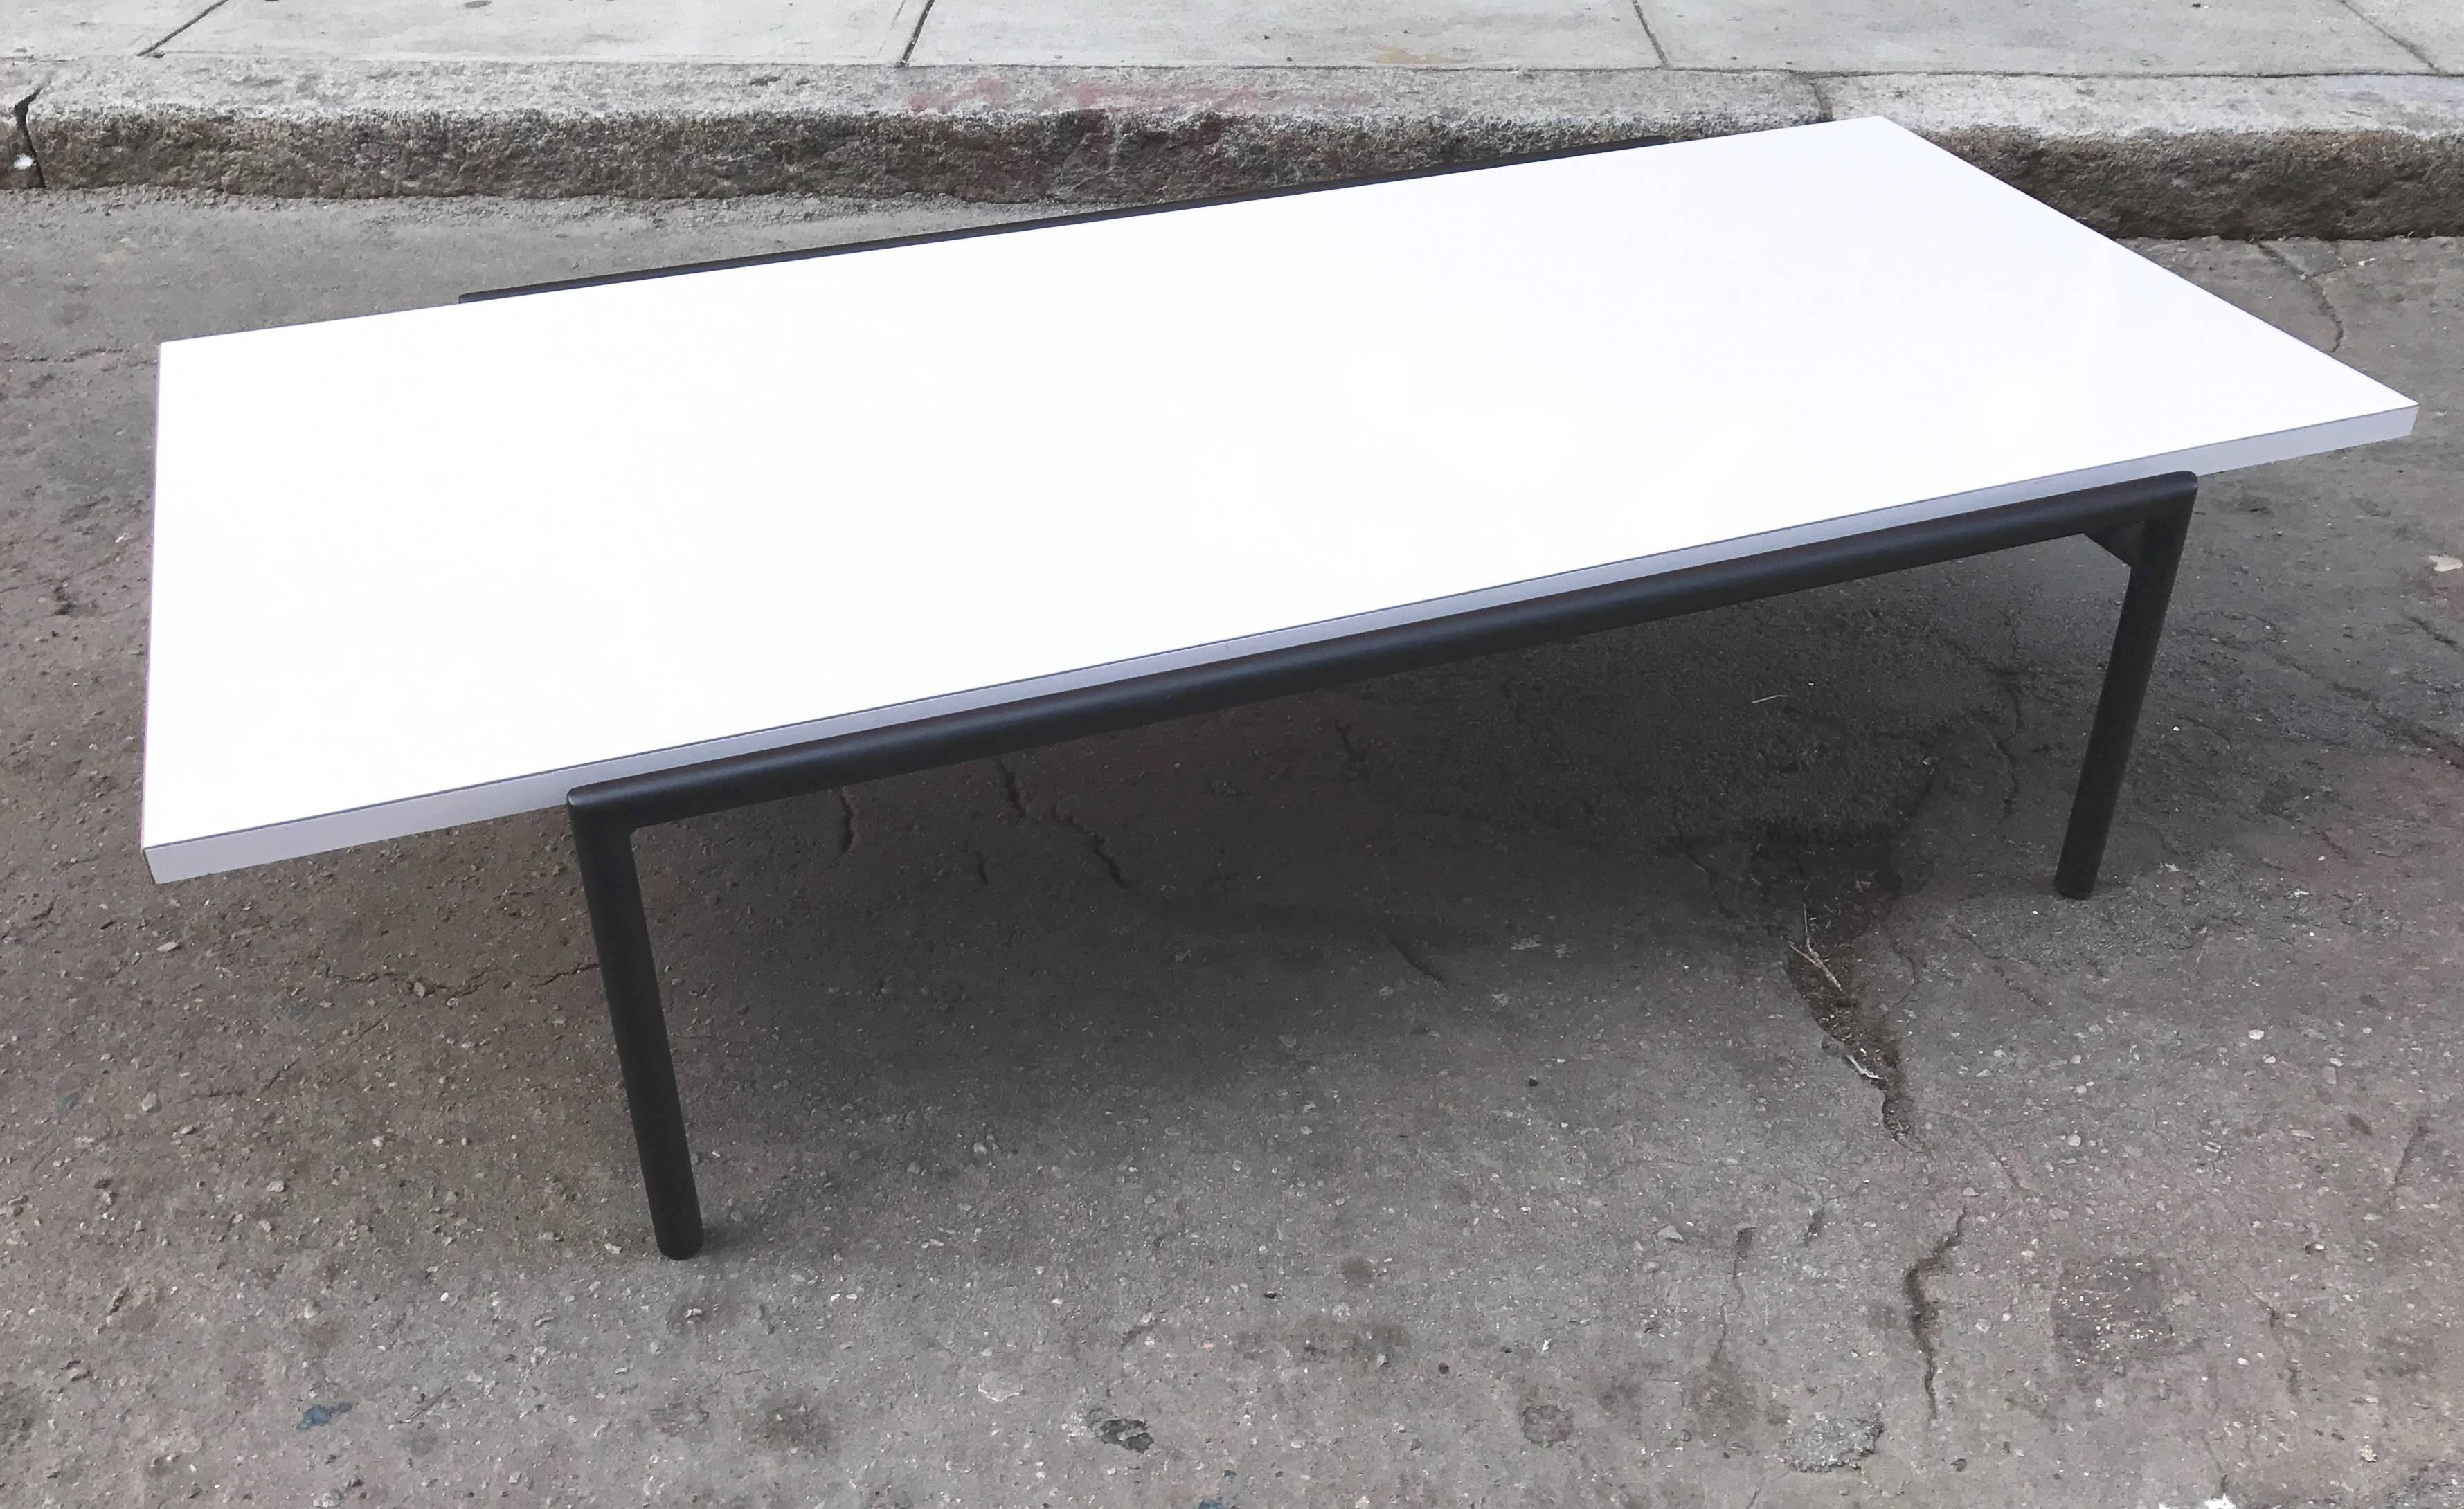 Low white laminate coffee table by architect Don Knorr (1922) with a black lacquer floating tubular frame, made by Vista of California during the 1950s. Don Knorr is an architect who did his graduate studies in design at Cranbrook. Knorr worked in